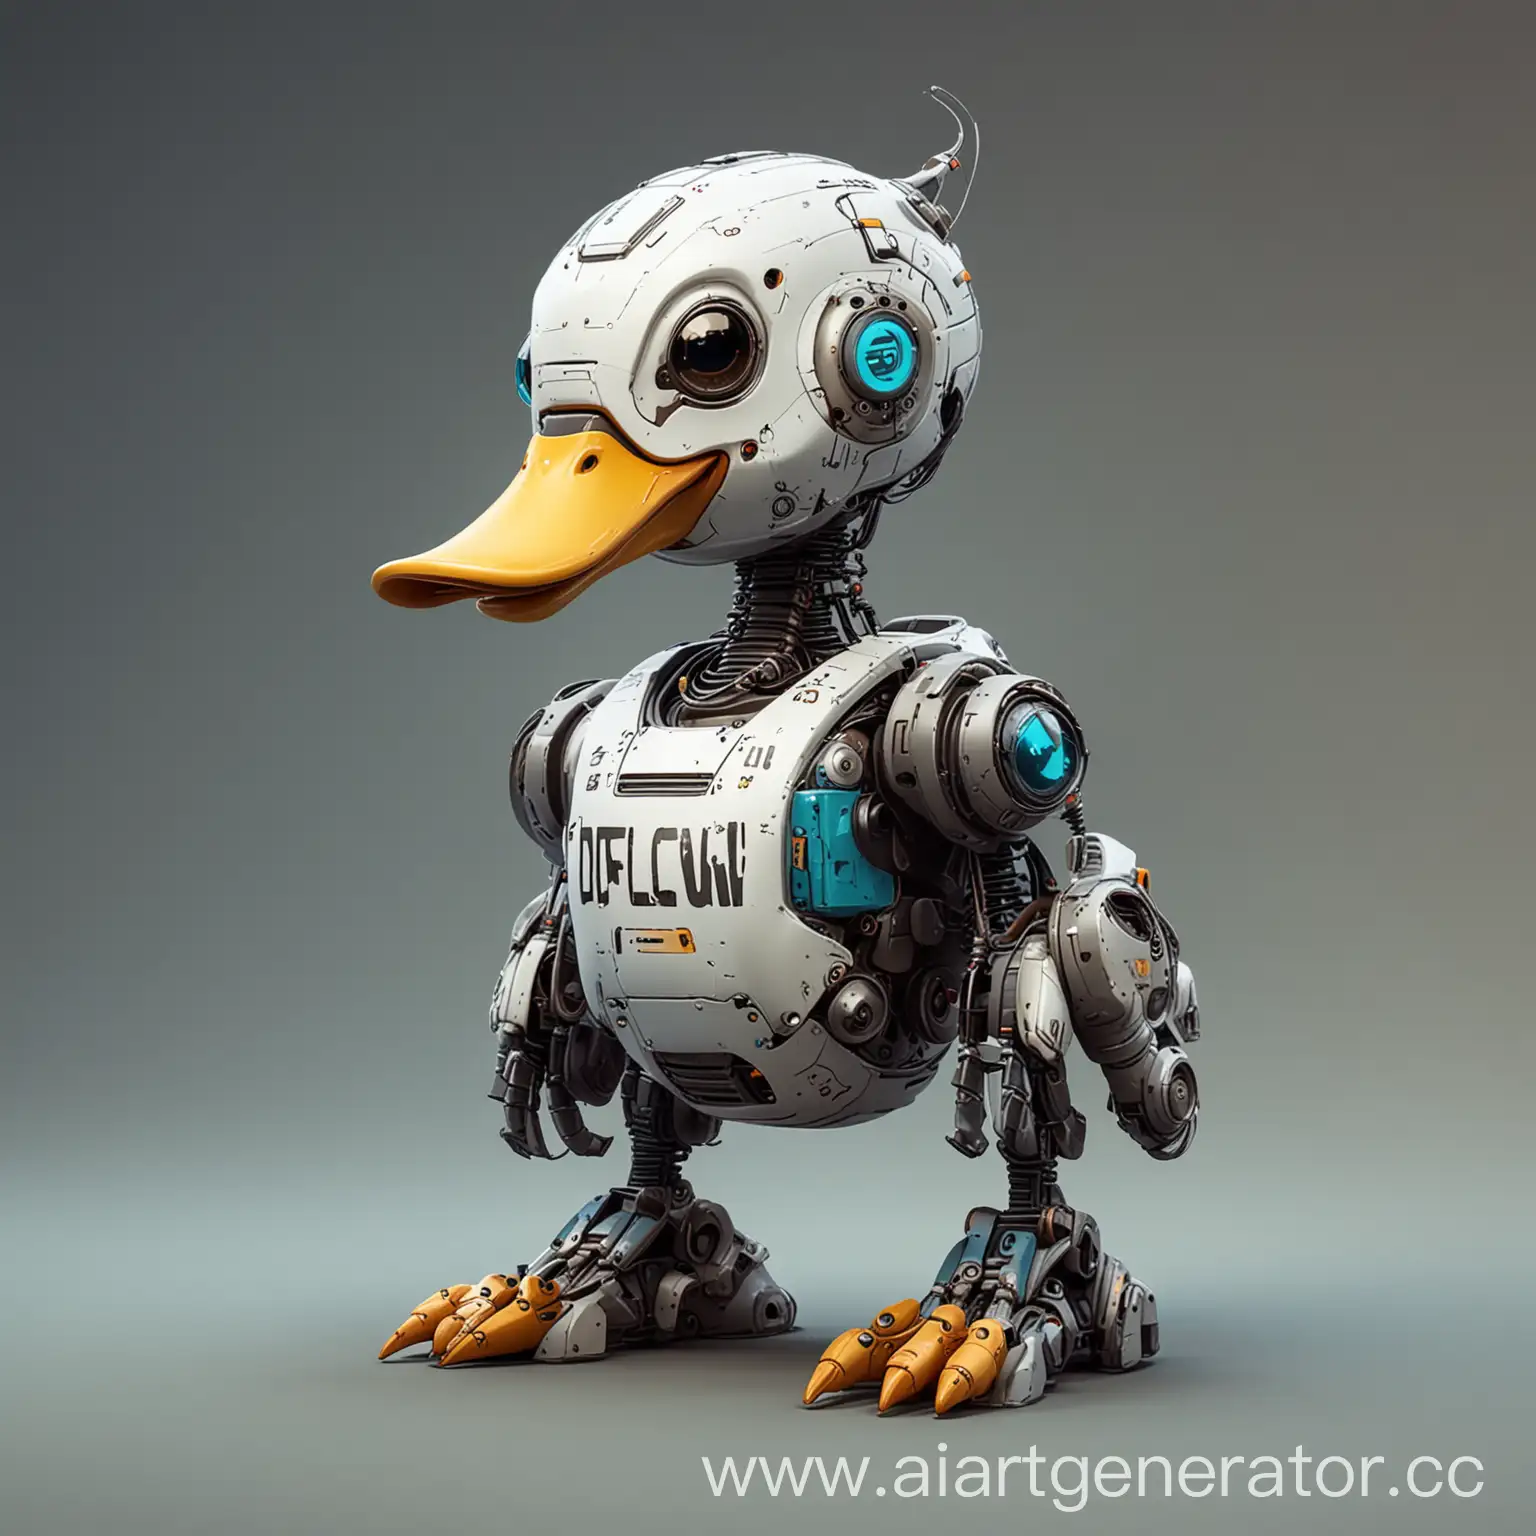 Futuristic alien duck robot painted in 2D with the inscription DFlow